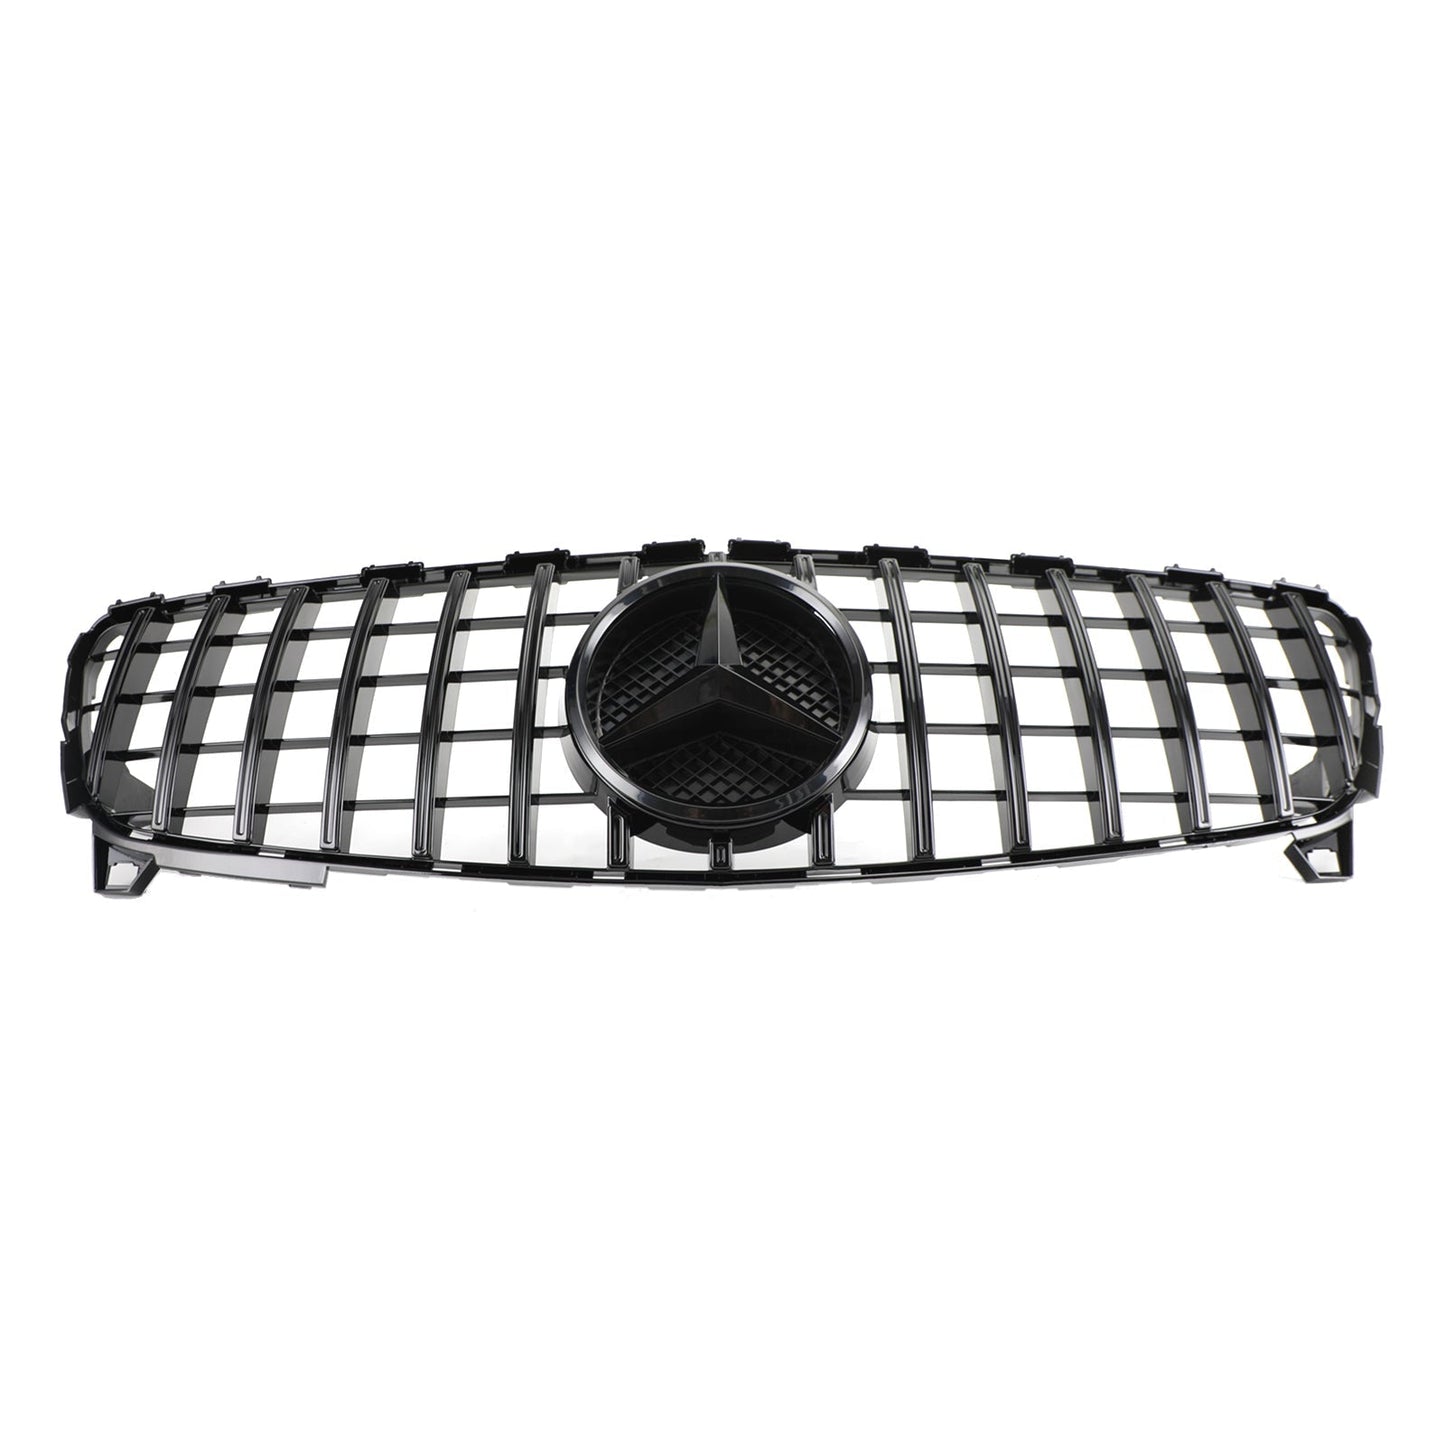 A CLASS W176 2016-2018 MERCEDES BENZ GTR Style Front Bumper Grille Grill